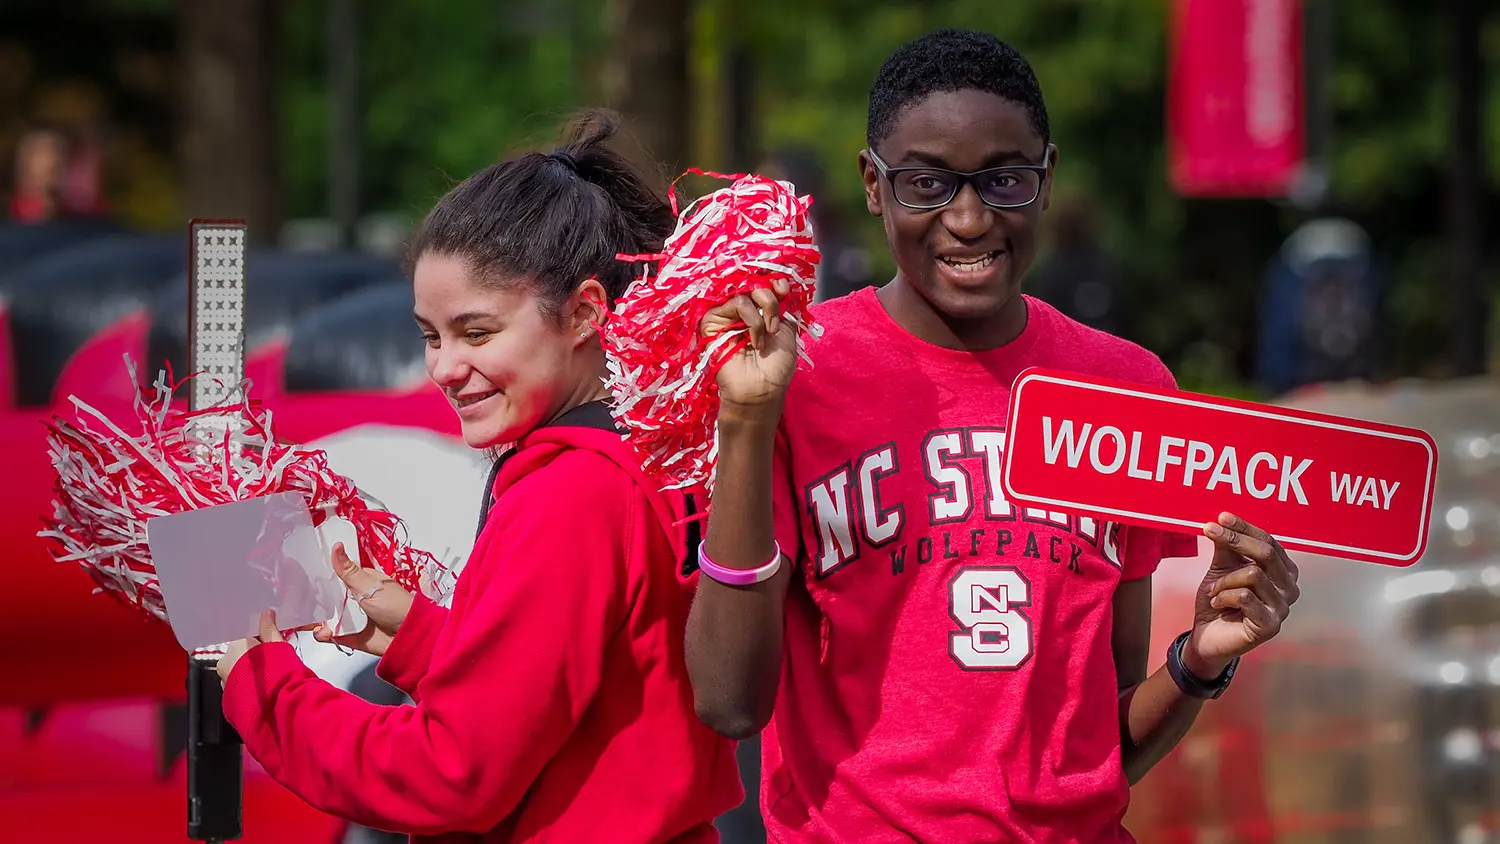 Two students pose in a photo booth during a student kickoff event for Red and White Week.